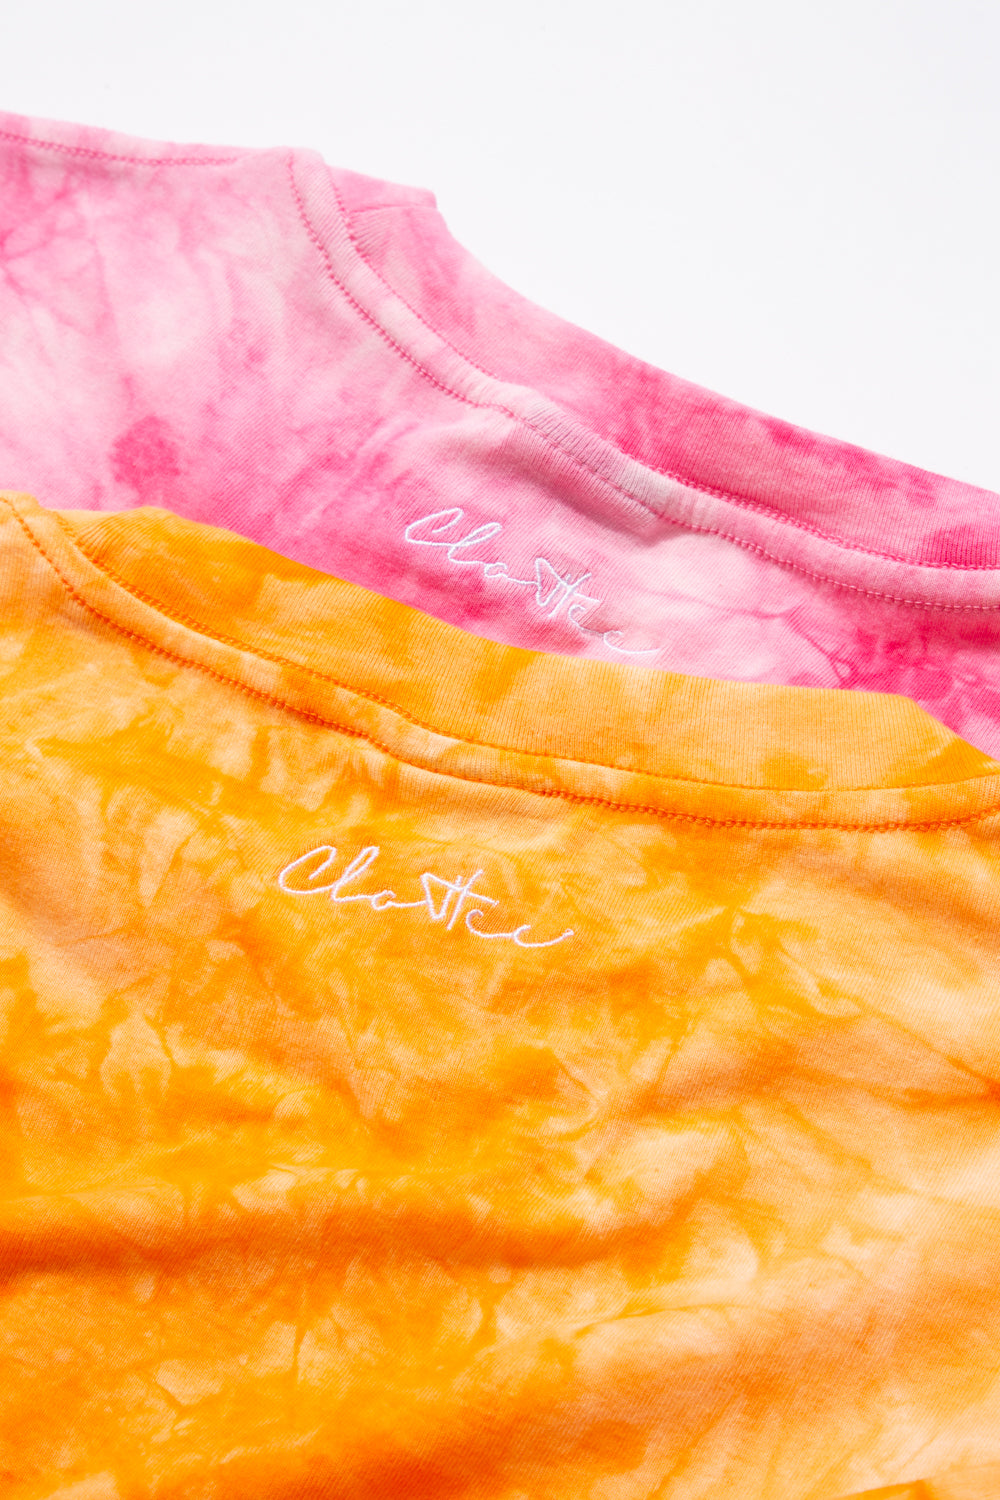 CLOTTEE Packs A Colorful Punch With Its Summer 2020 Tie-Dye Capsule ...